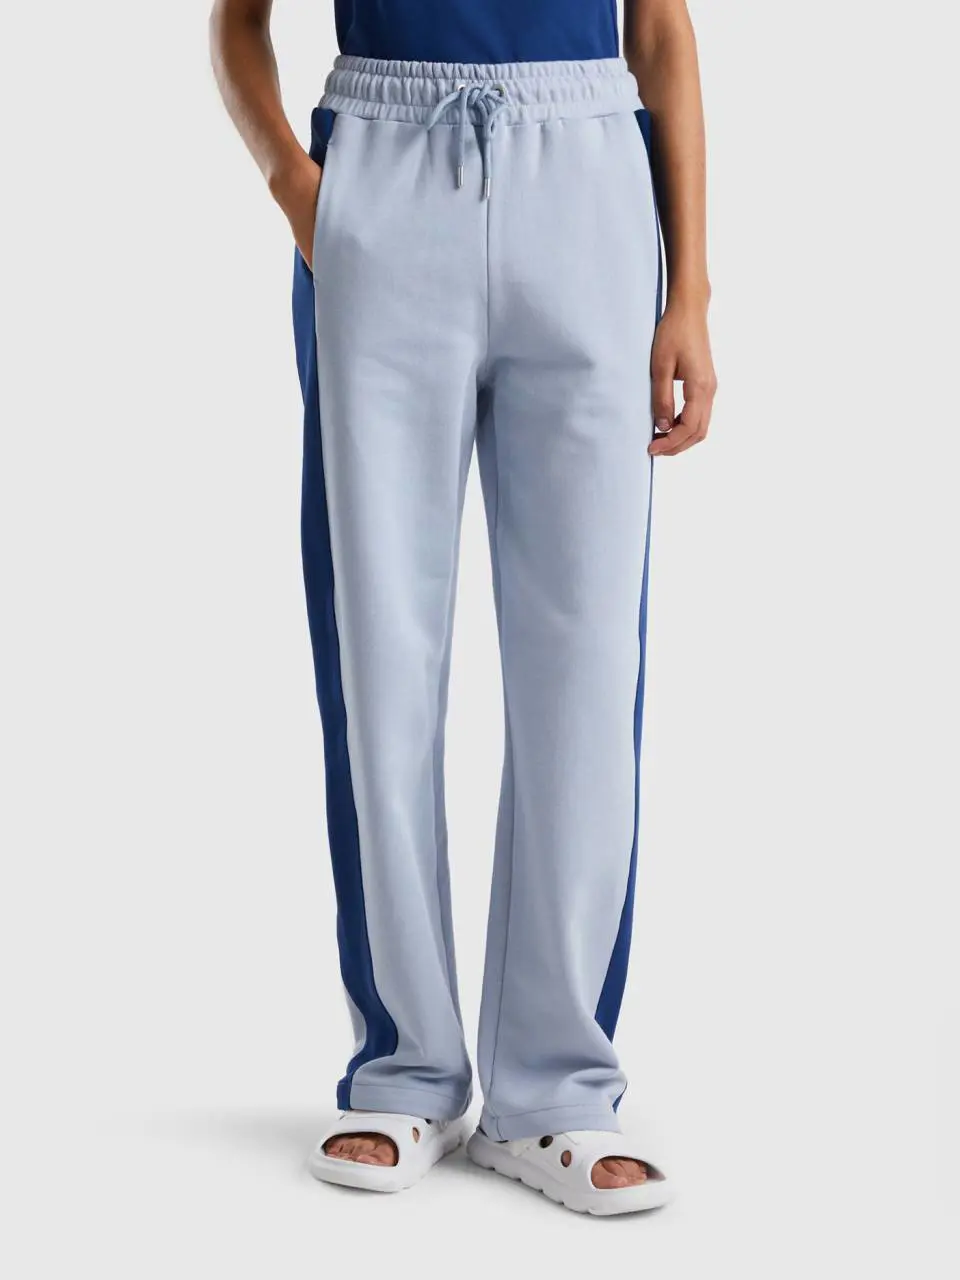 Benetton sky blue trousers with dark blue band. 1